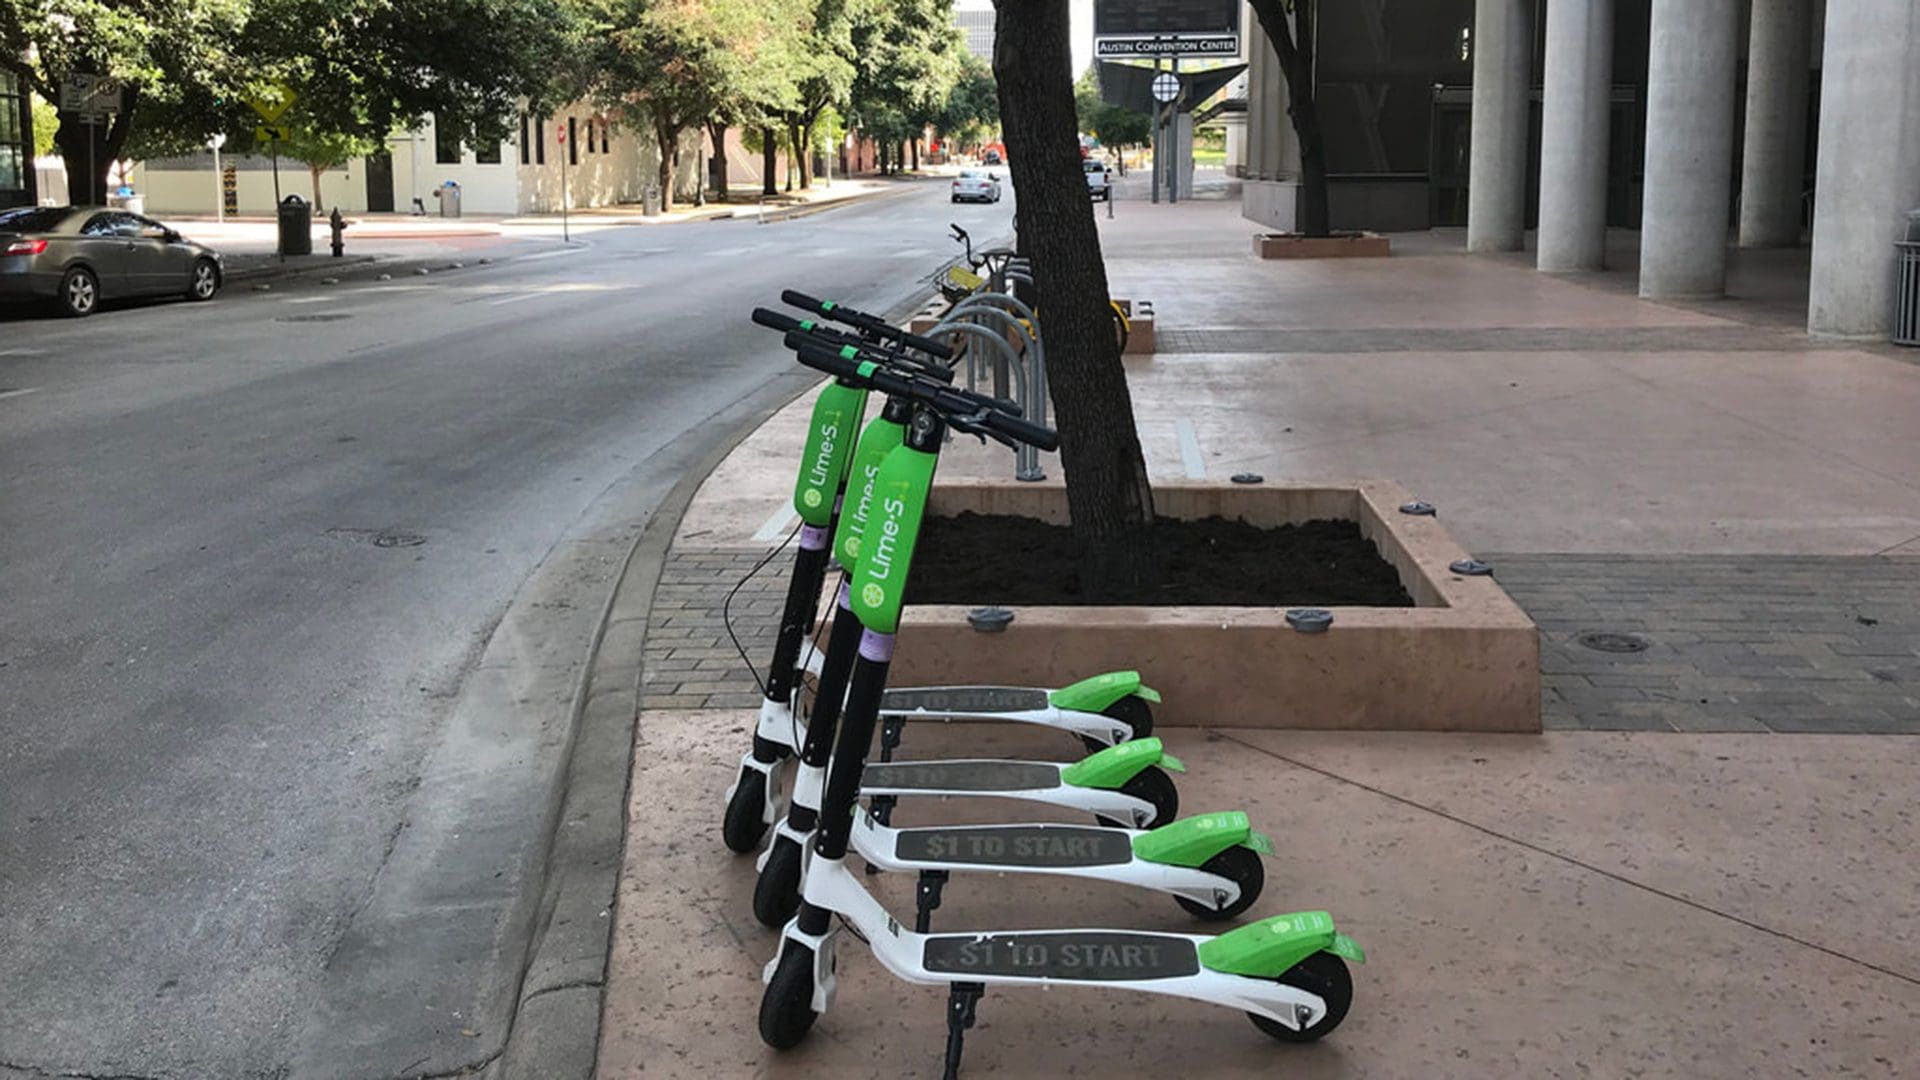 Row of Lime scooters